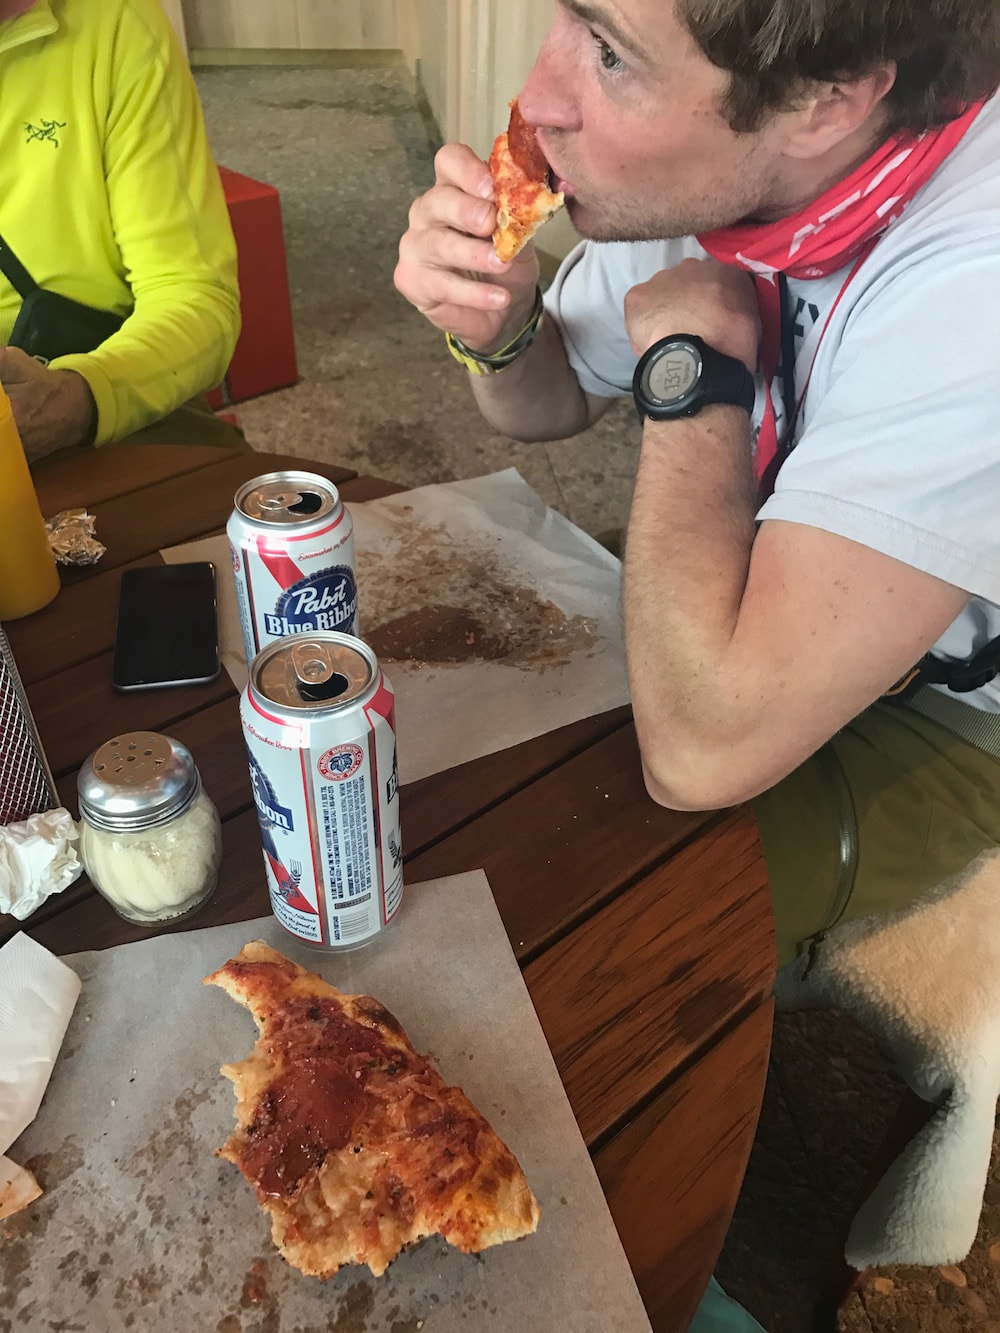 Southcable cafe has $3 PBRs and $4.50 slices of Pizza. Bryce likes it. Look at that eye... photo: snowbrains